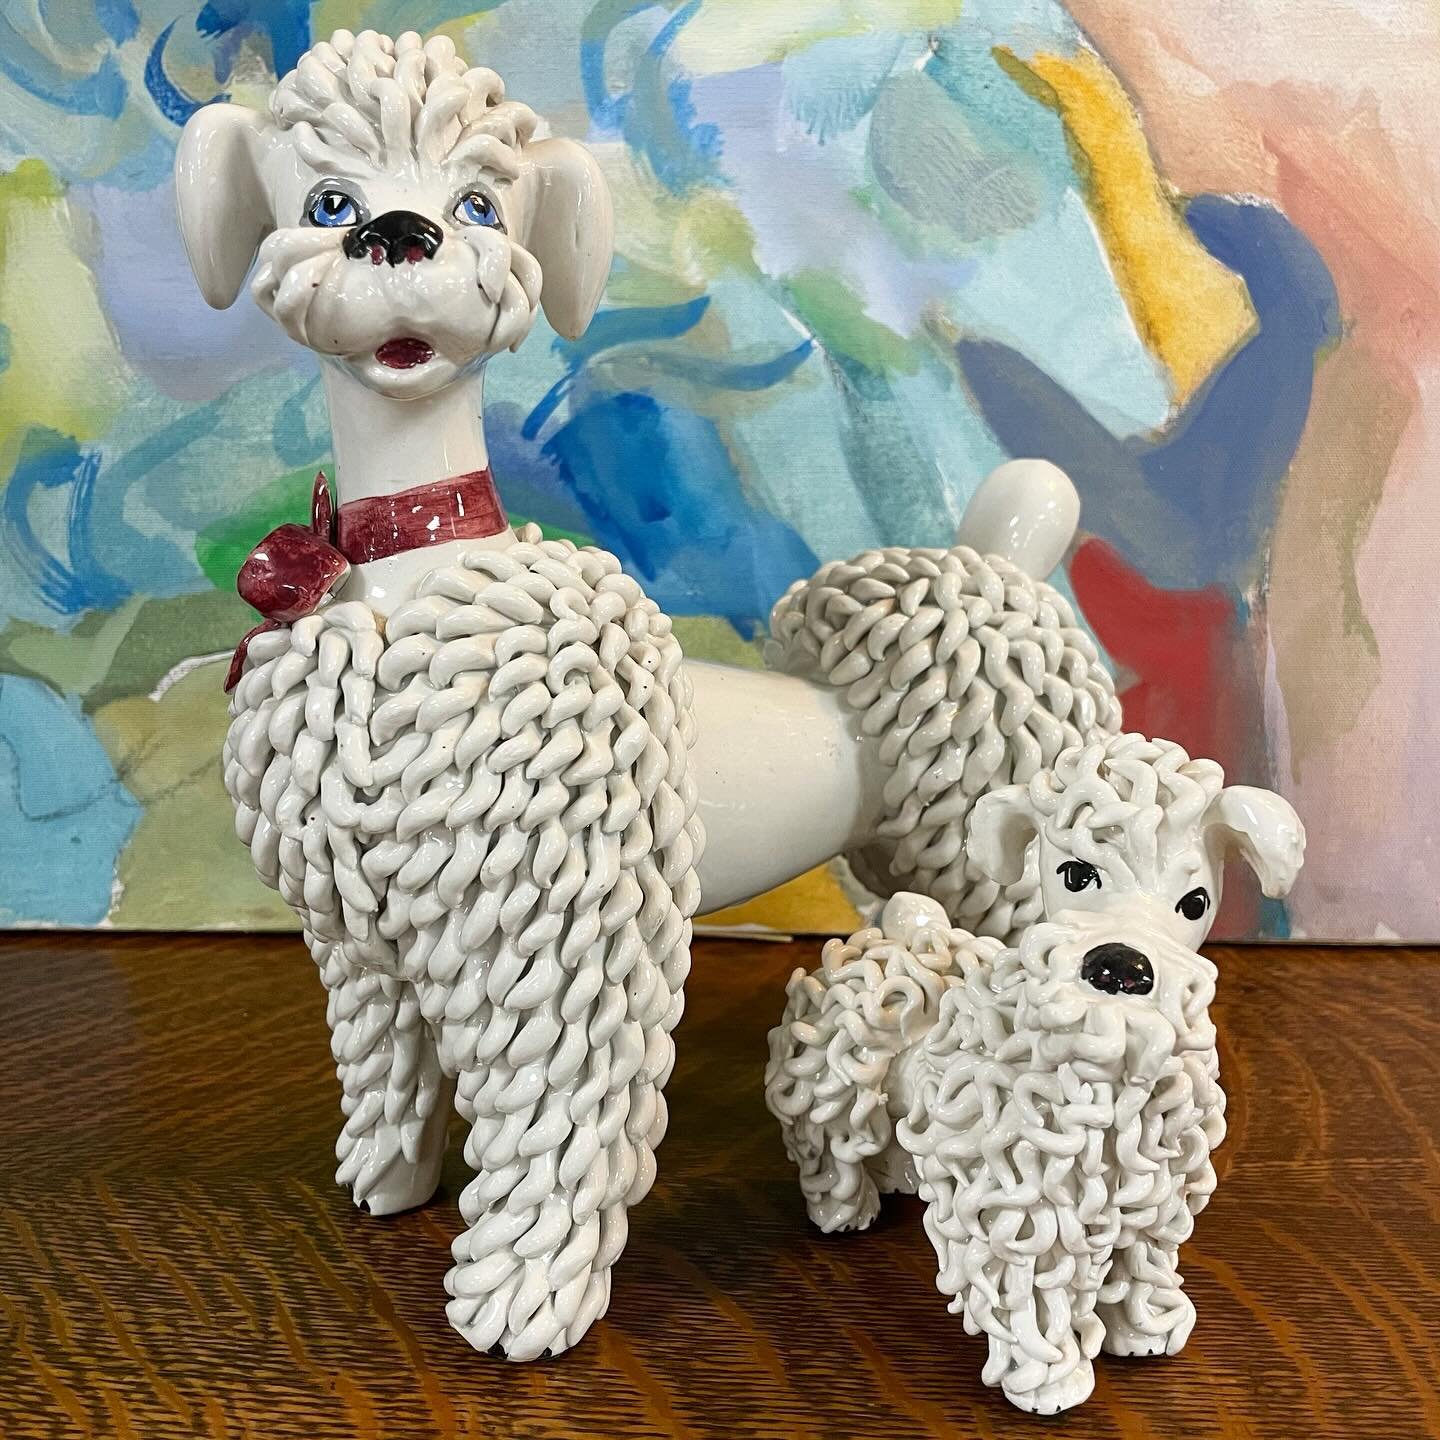 Some poodle pals! Ceramic, made in Italy, bigger is 9.5&rdquo; tall, 19&rdquo; long, $53. Smaller is 5&rdquo; tall, 5&rdquo; long, $27.